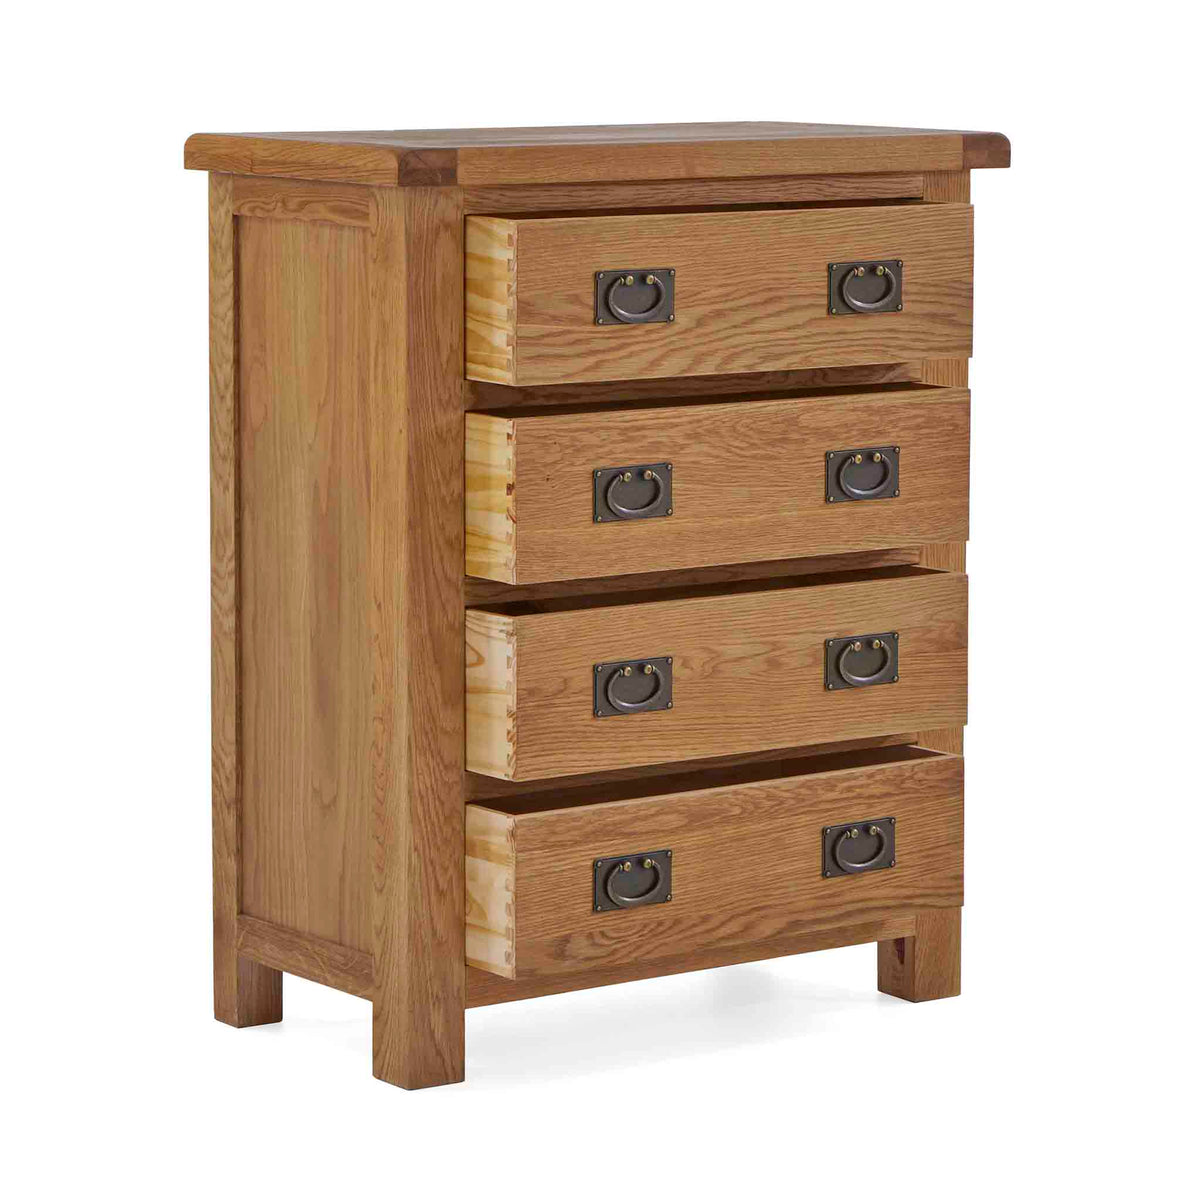 Zelah Oak 4 Drawer Chest - With All Drawers open